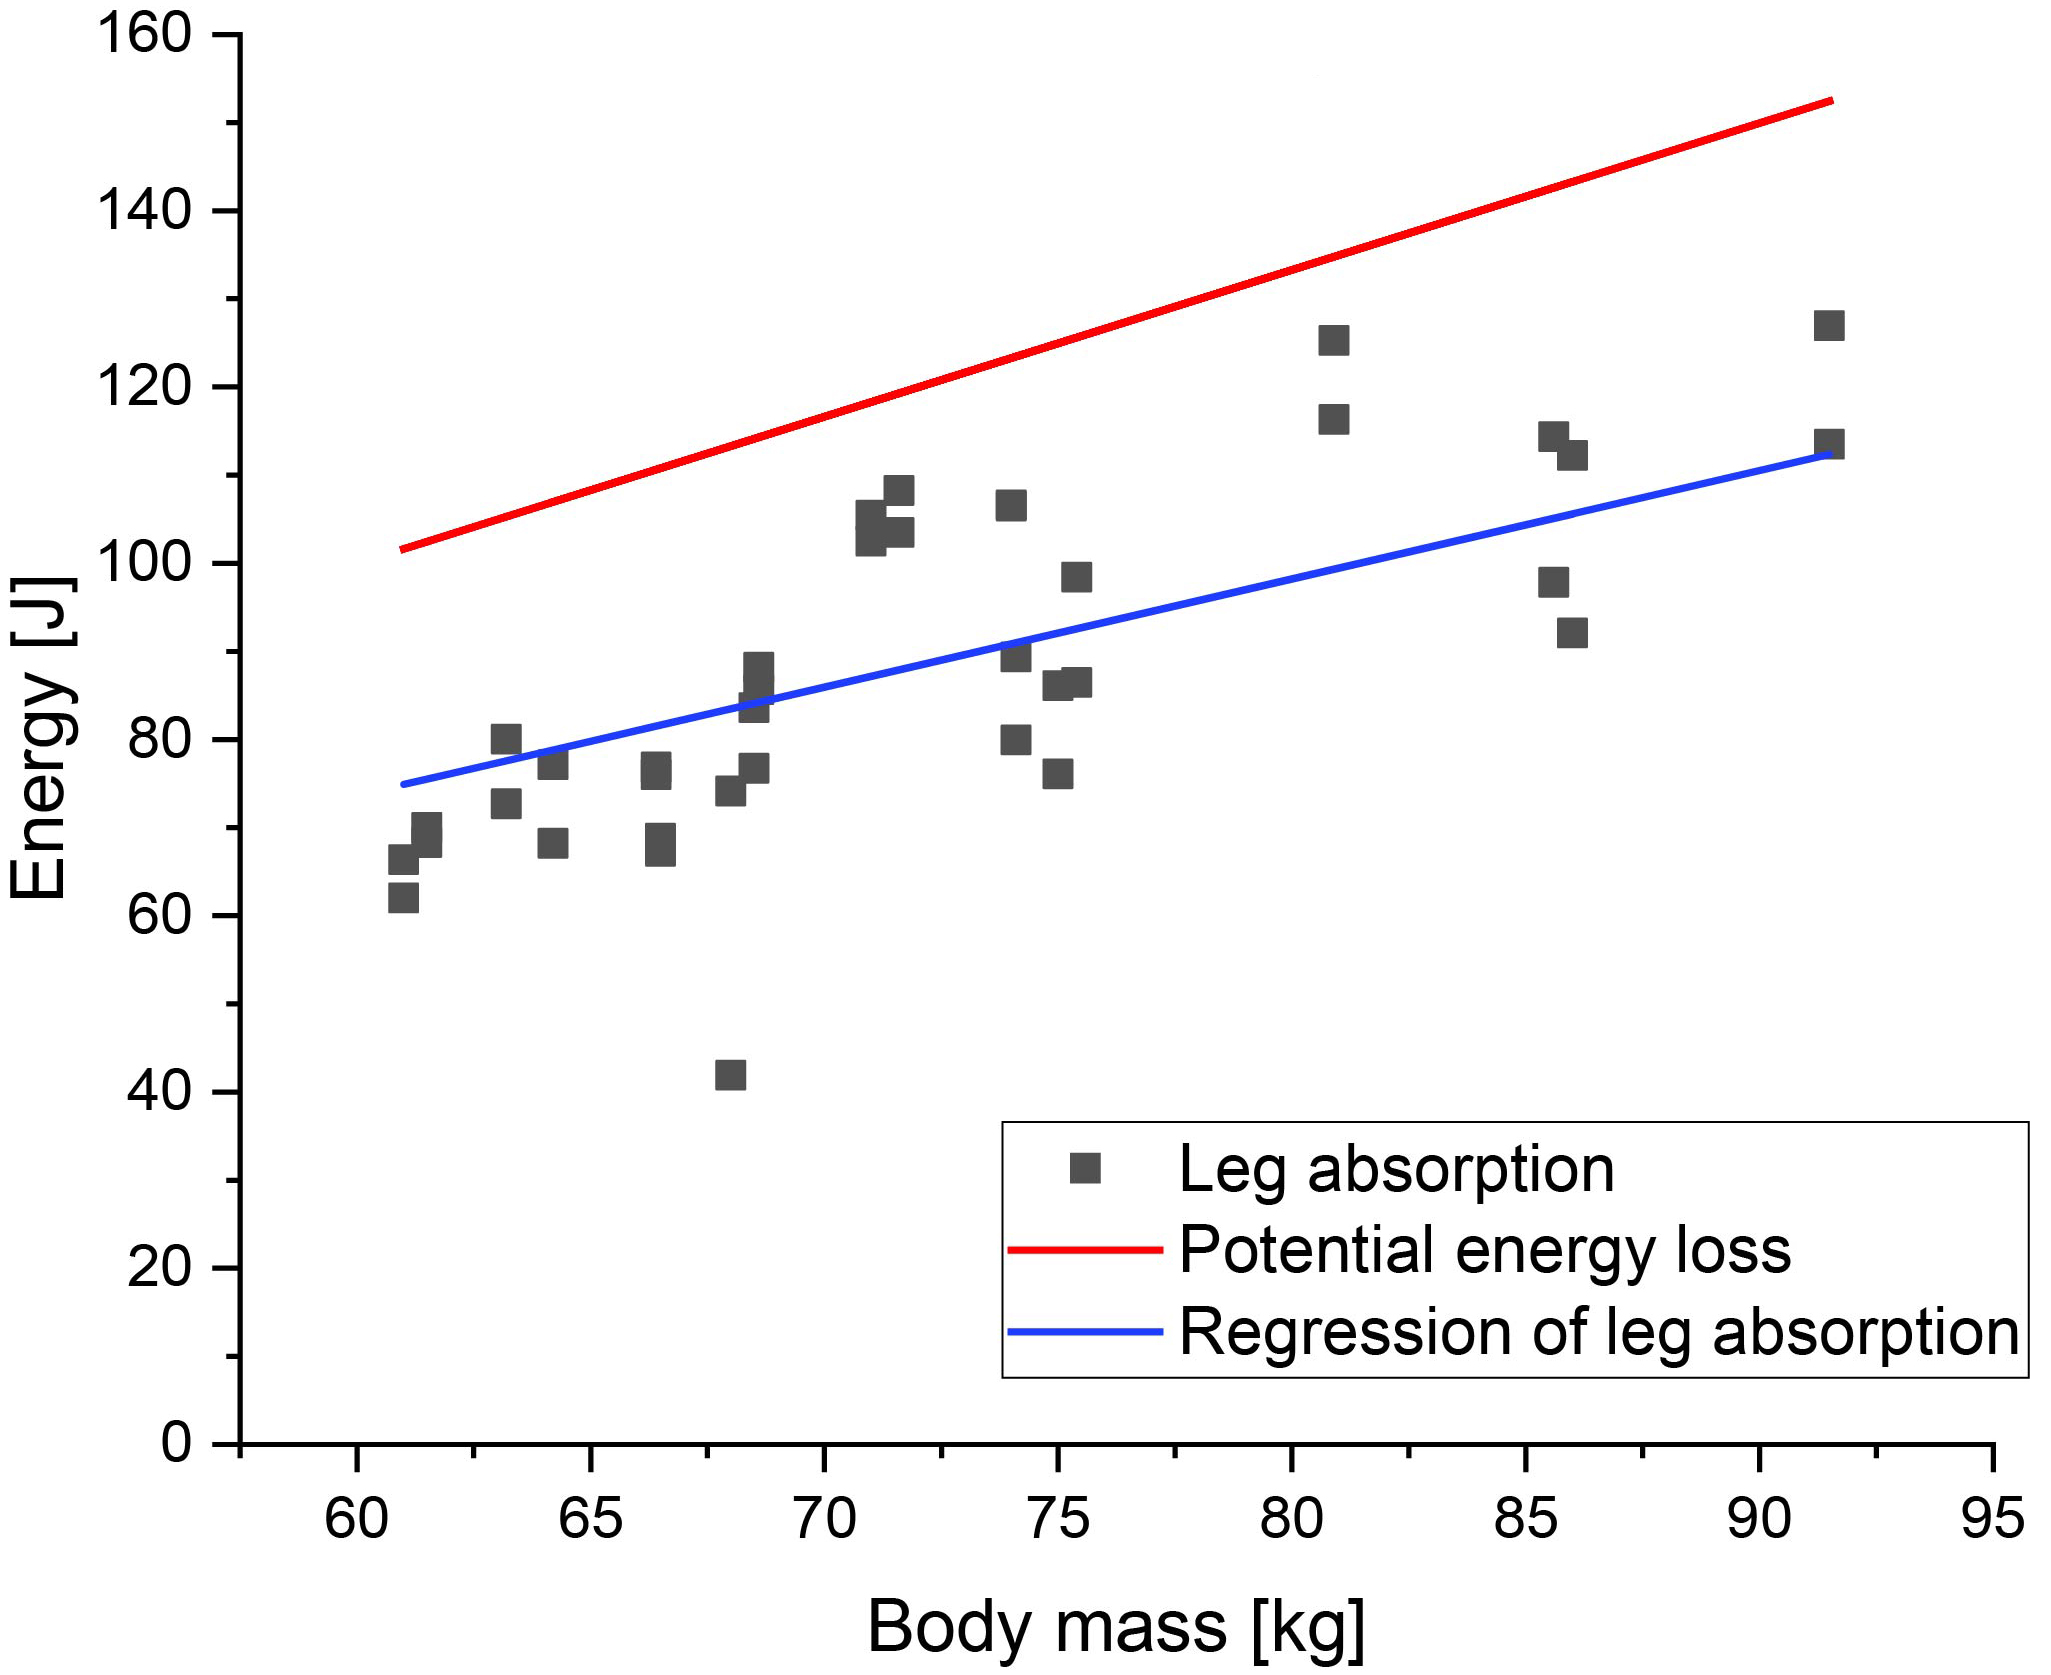 Potential energy loss during one step descent and single leg energy absorption during stance.